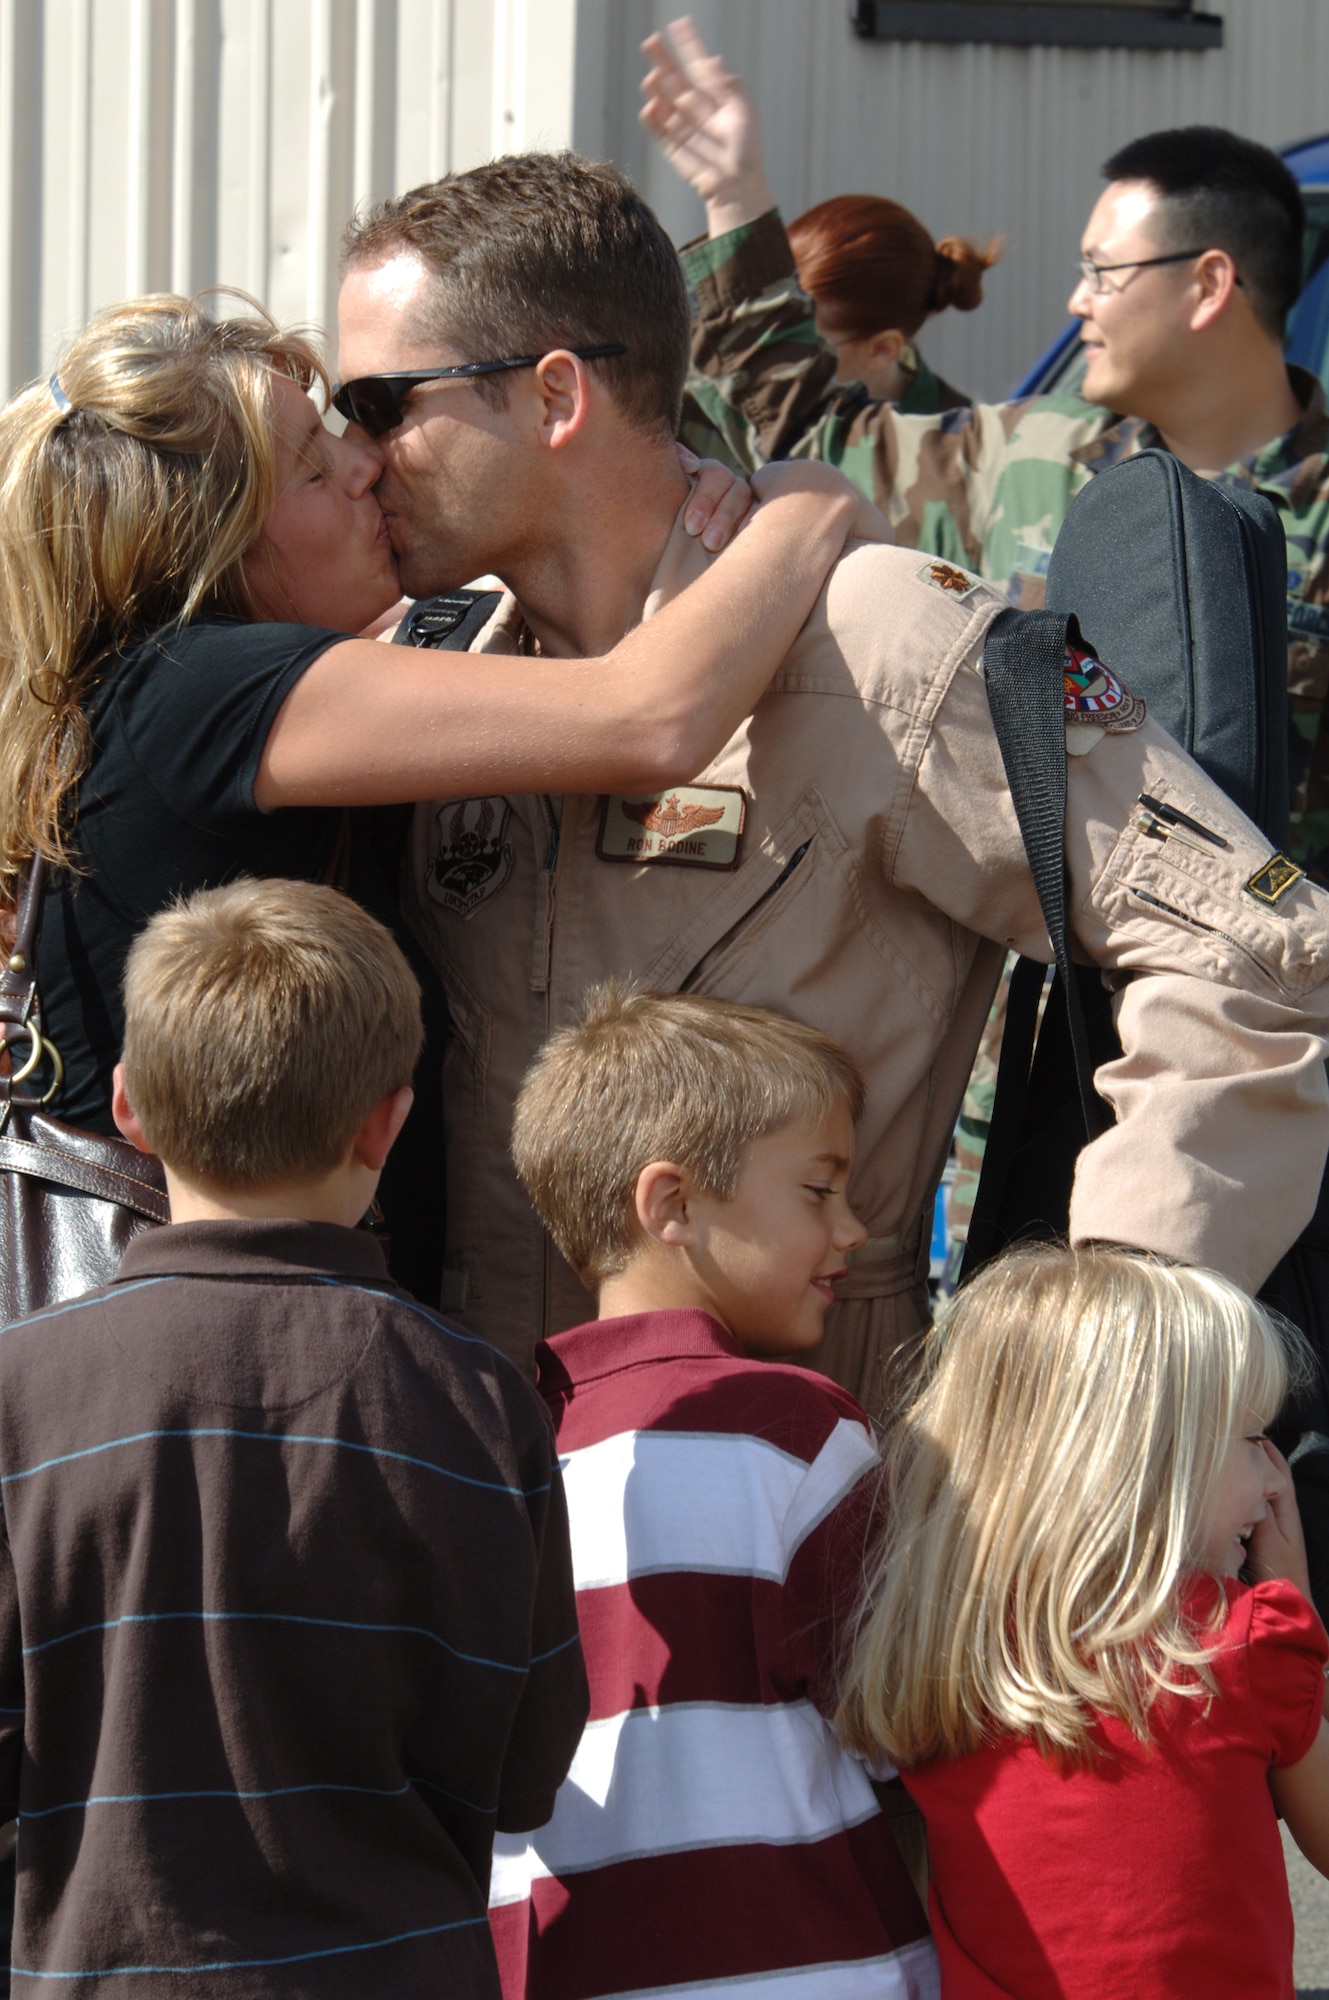 Maj. Ron Bodine, 603rd Air Operations Center, is greeted by his family during his redeployment in September. The Air Force recently clarified post-deployment stand-down time. (Photo by Airman 1st Class Marc I. Lane)